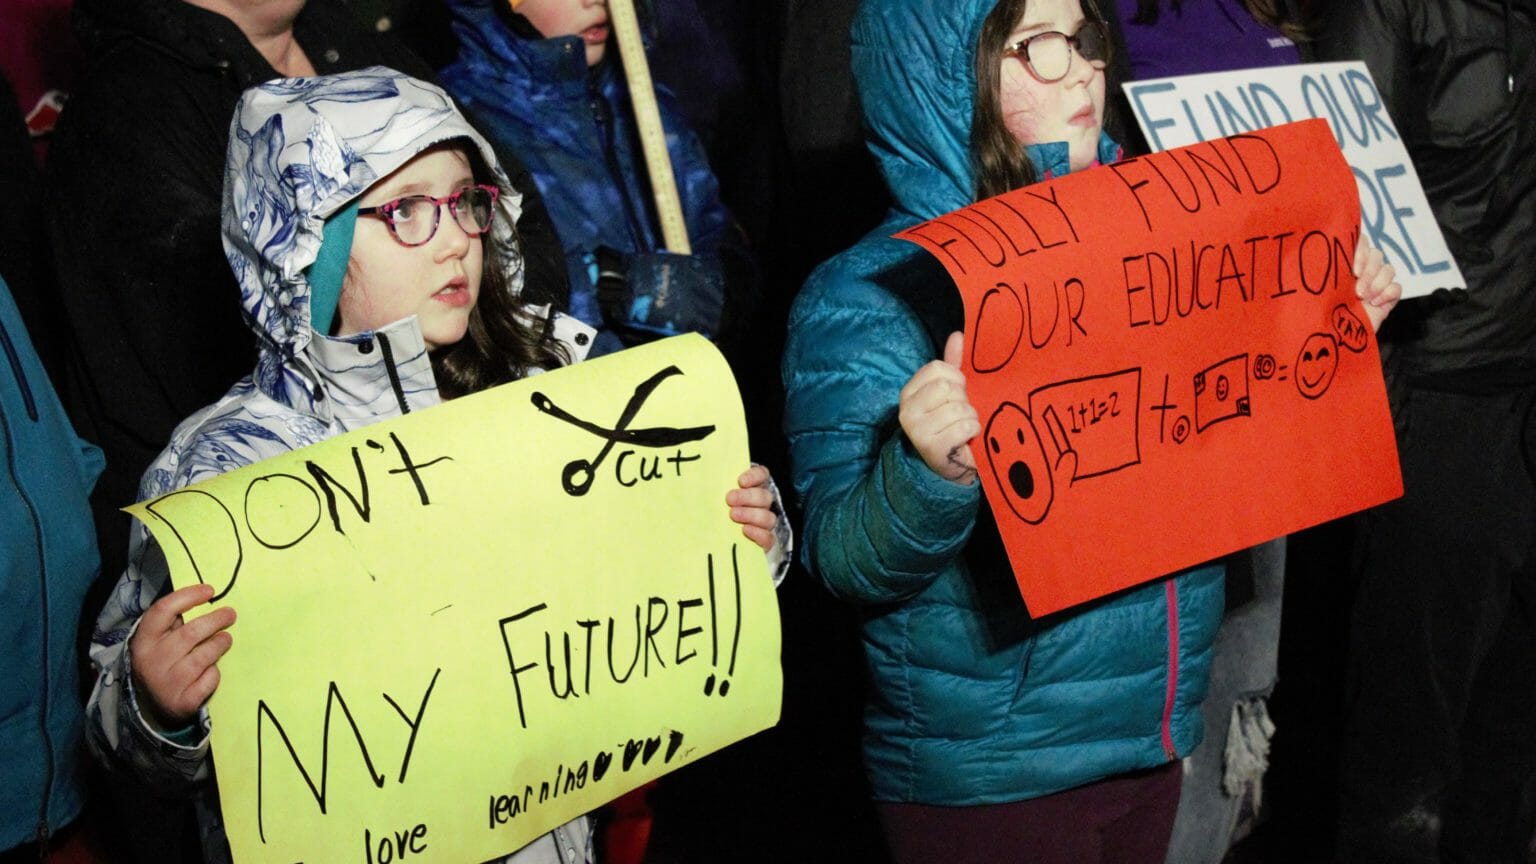 With songs and speeches, Alaskans rally in Juneau to fund more education